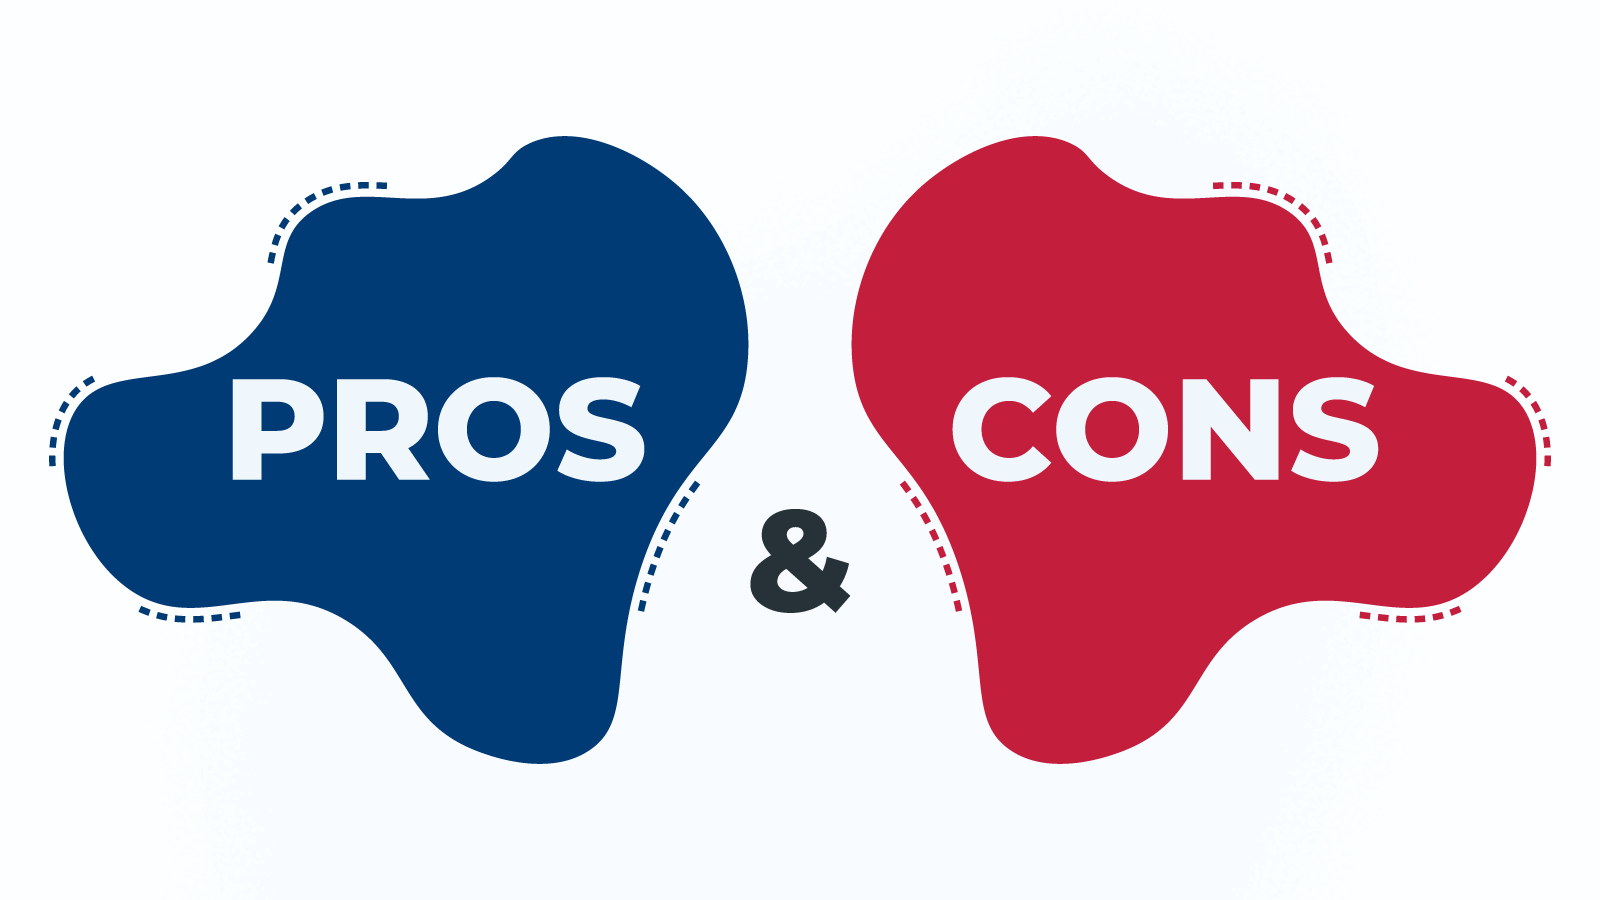 Get your new casino pros & cons straight